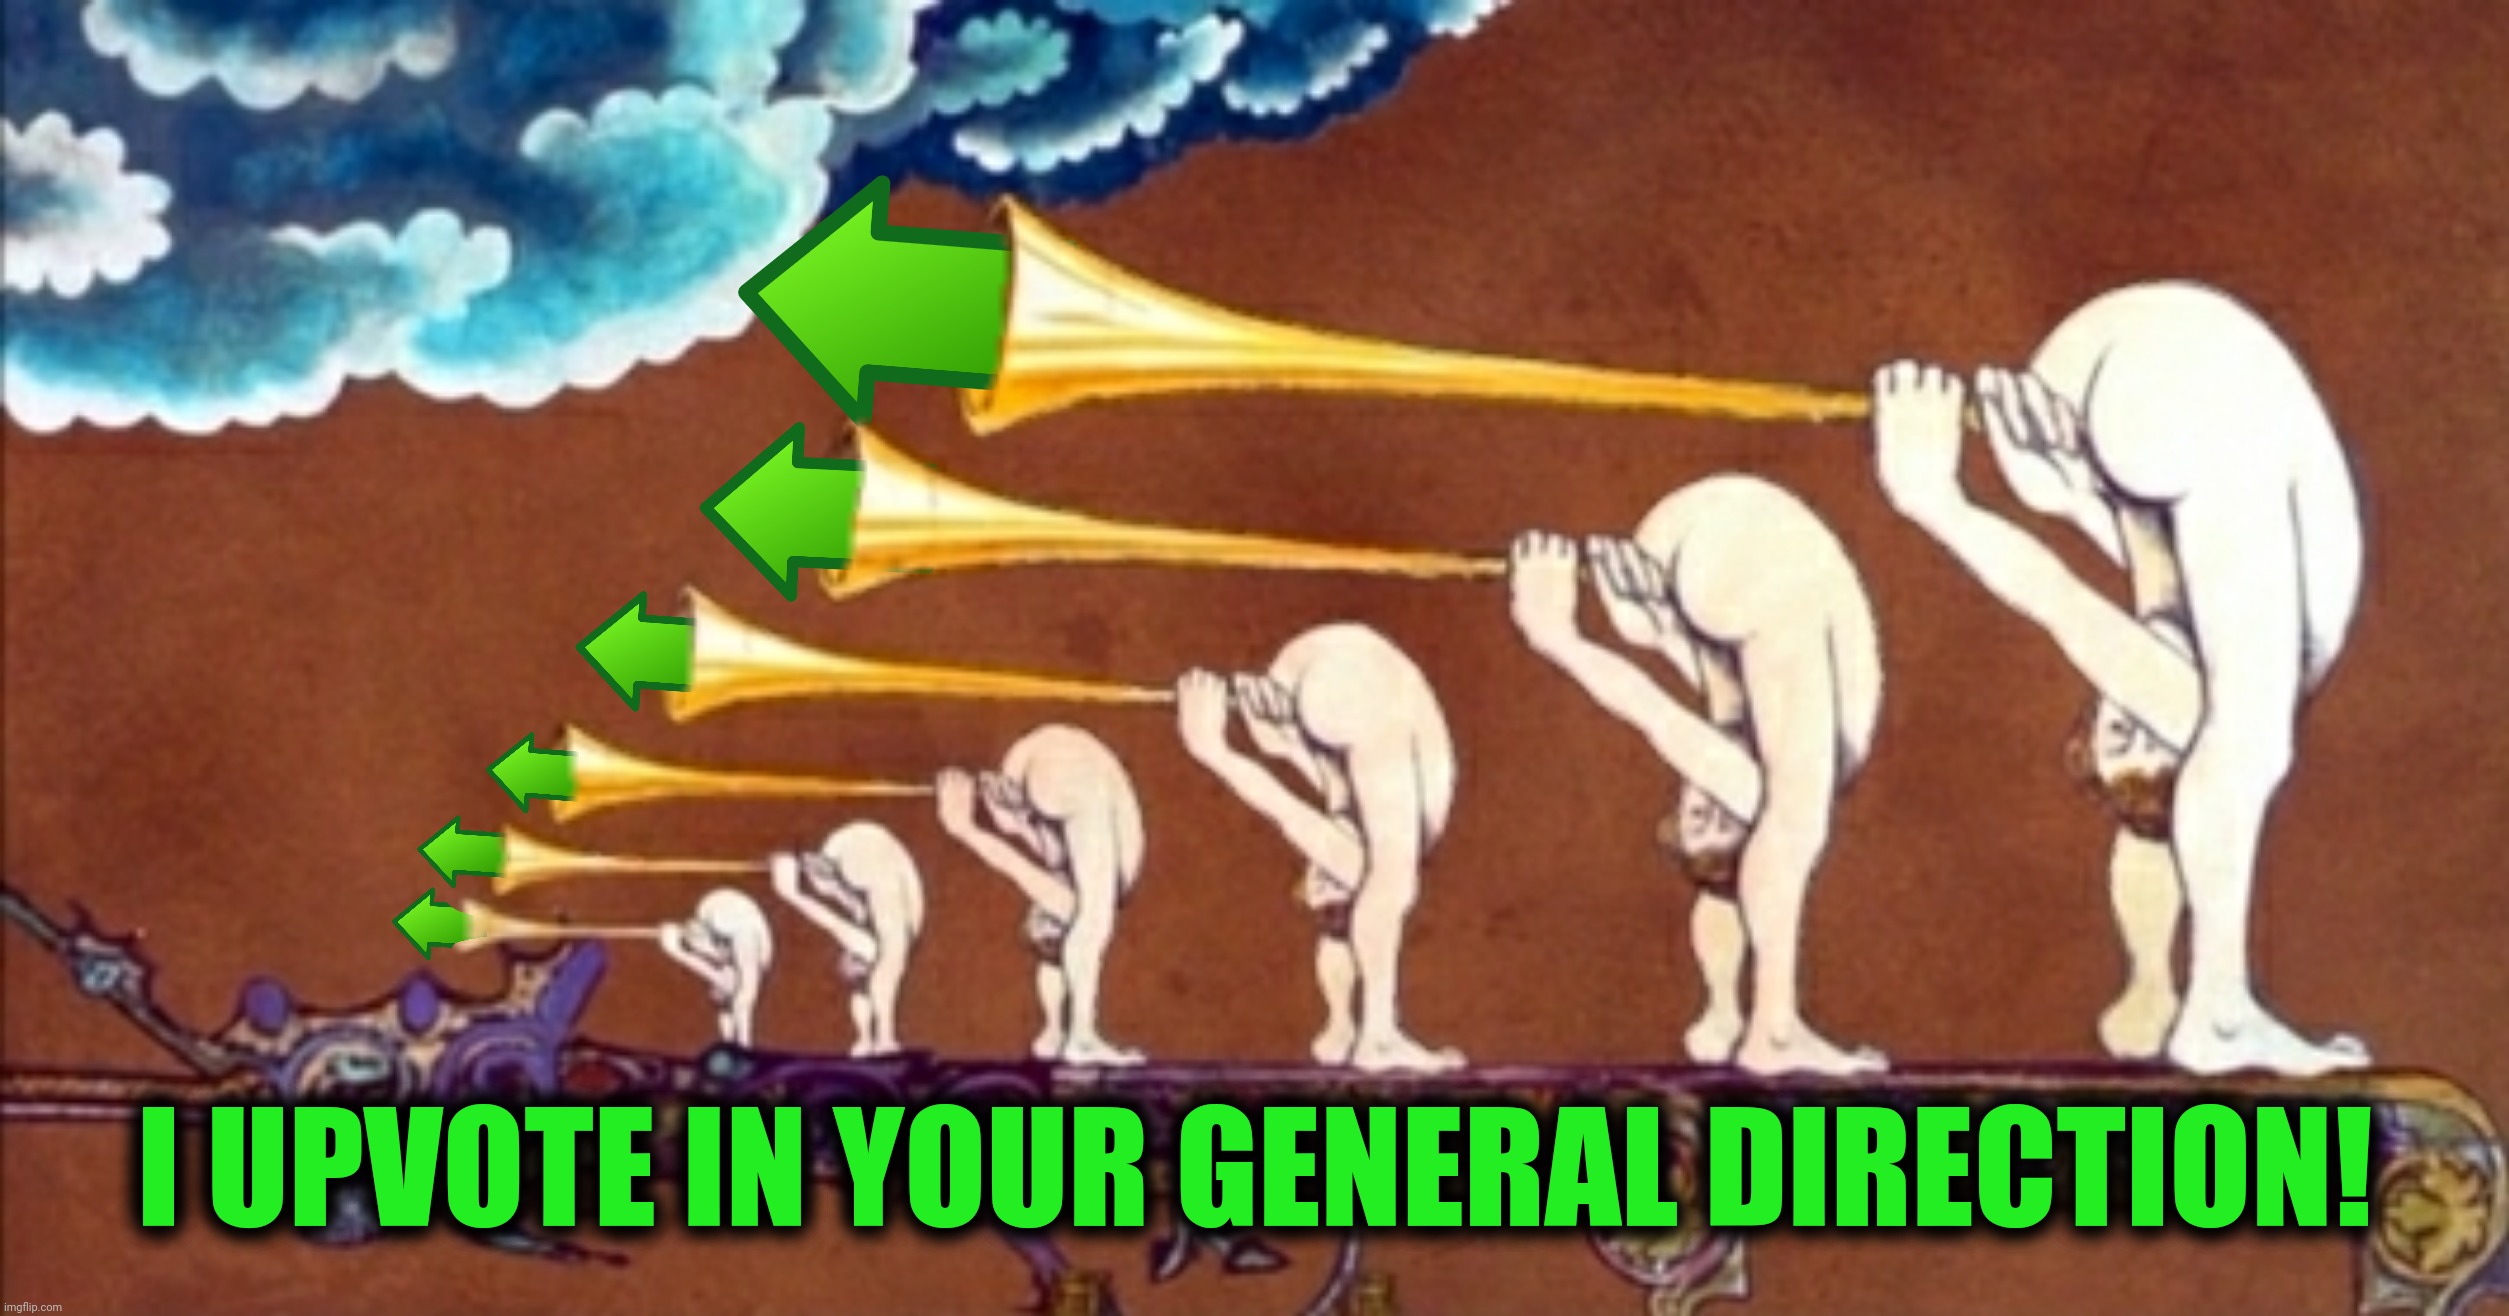 I UPVOTE IN YOUR GENERAL DIRECTION! | made w/ Imgflip meme maker